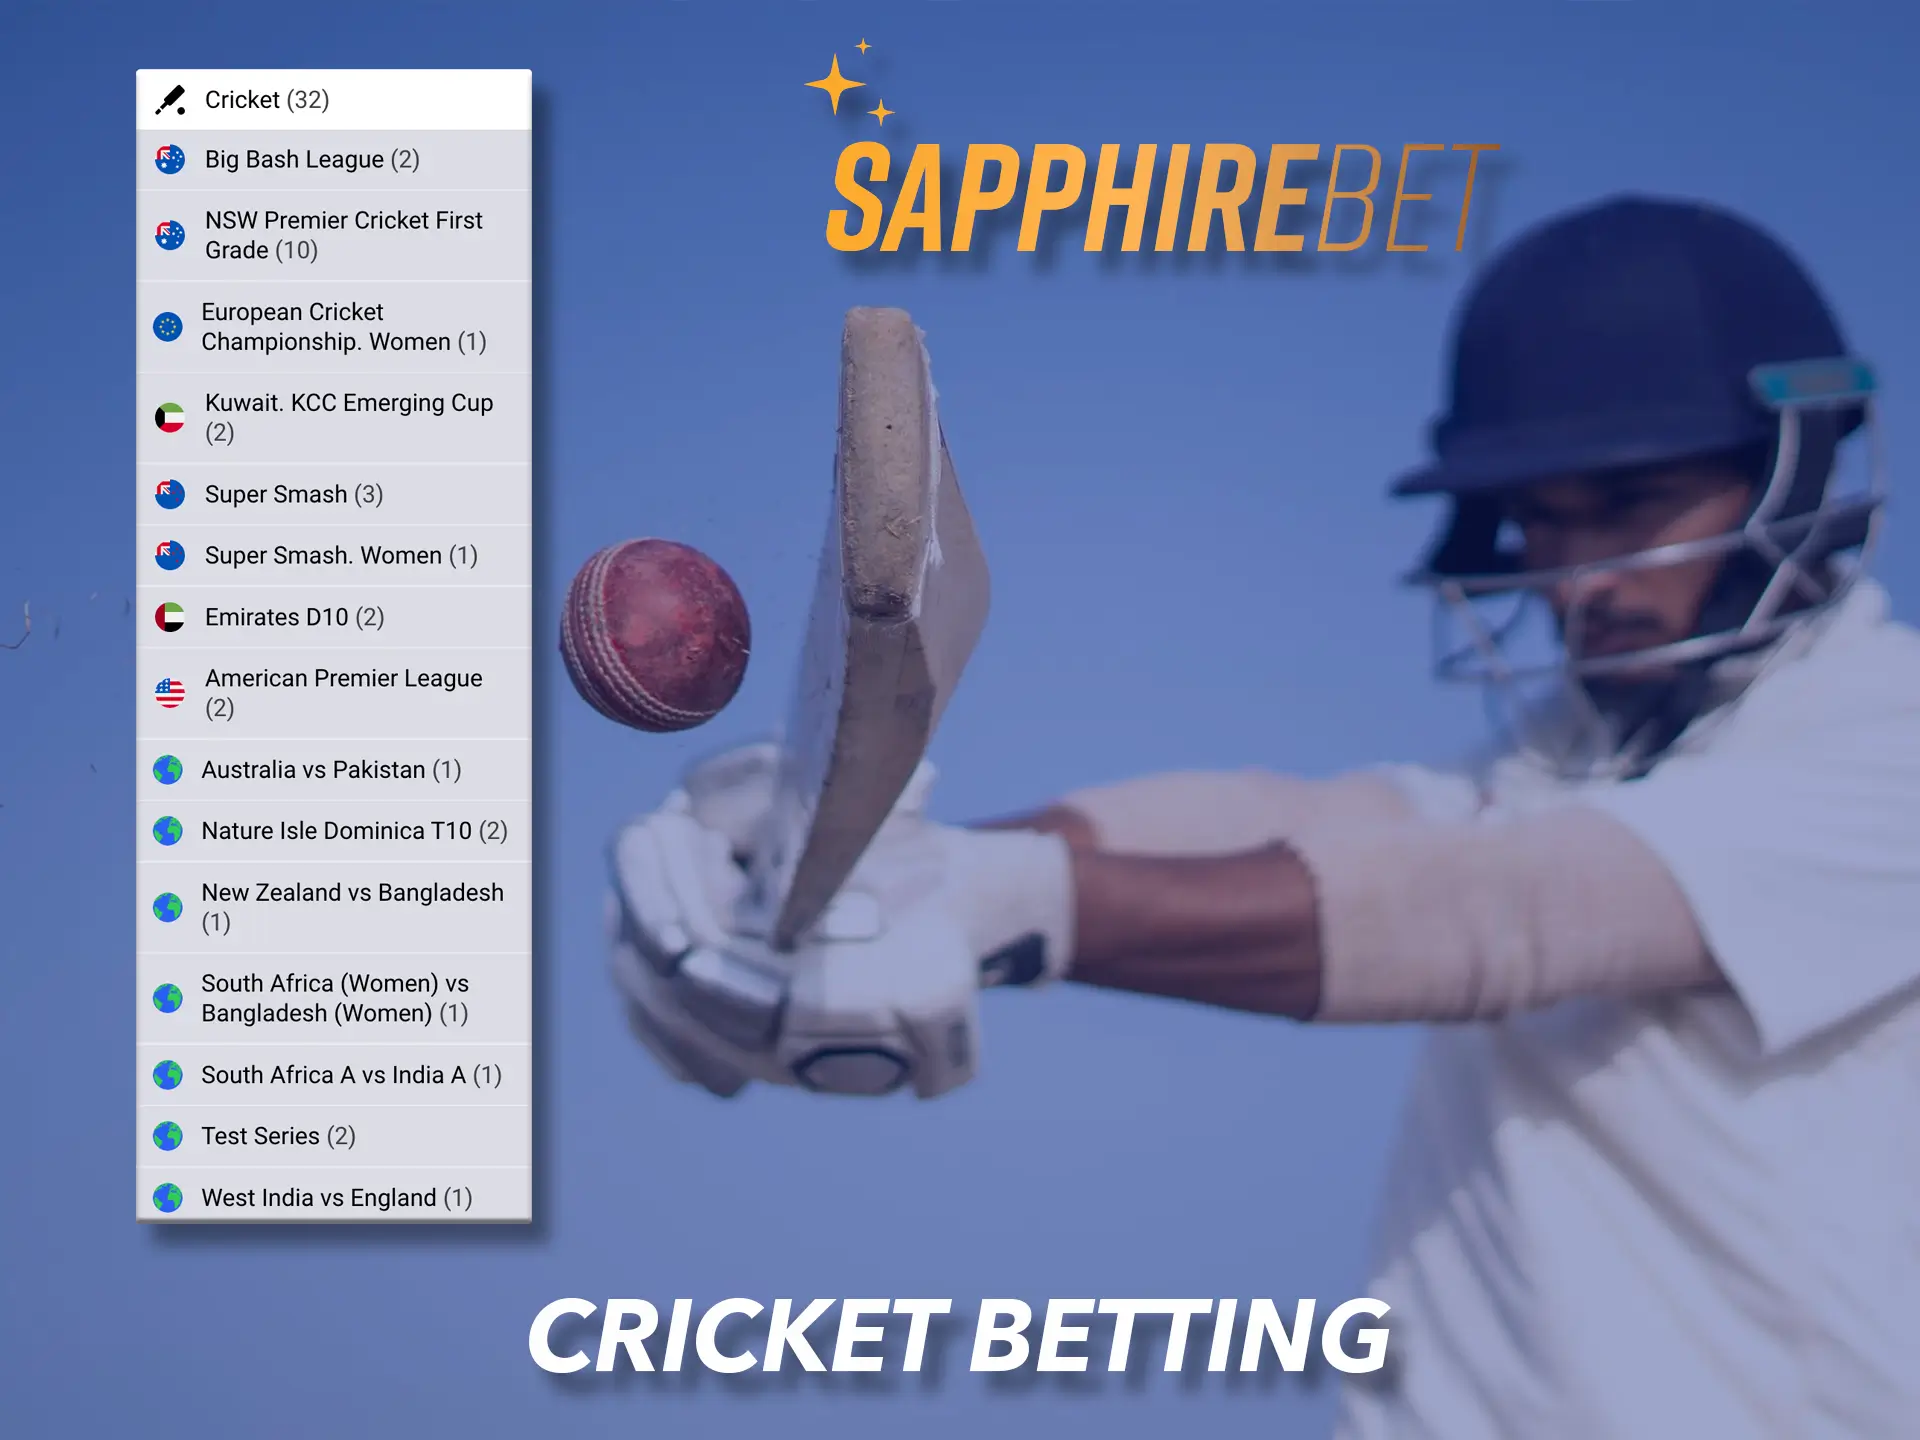 Choose the cricket tournament you want and make your predictions at Sapphirebet.